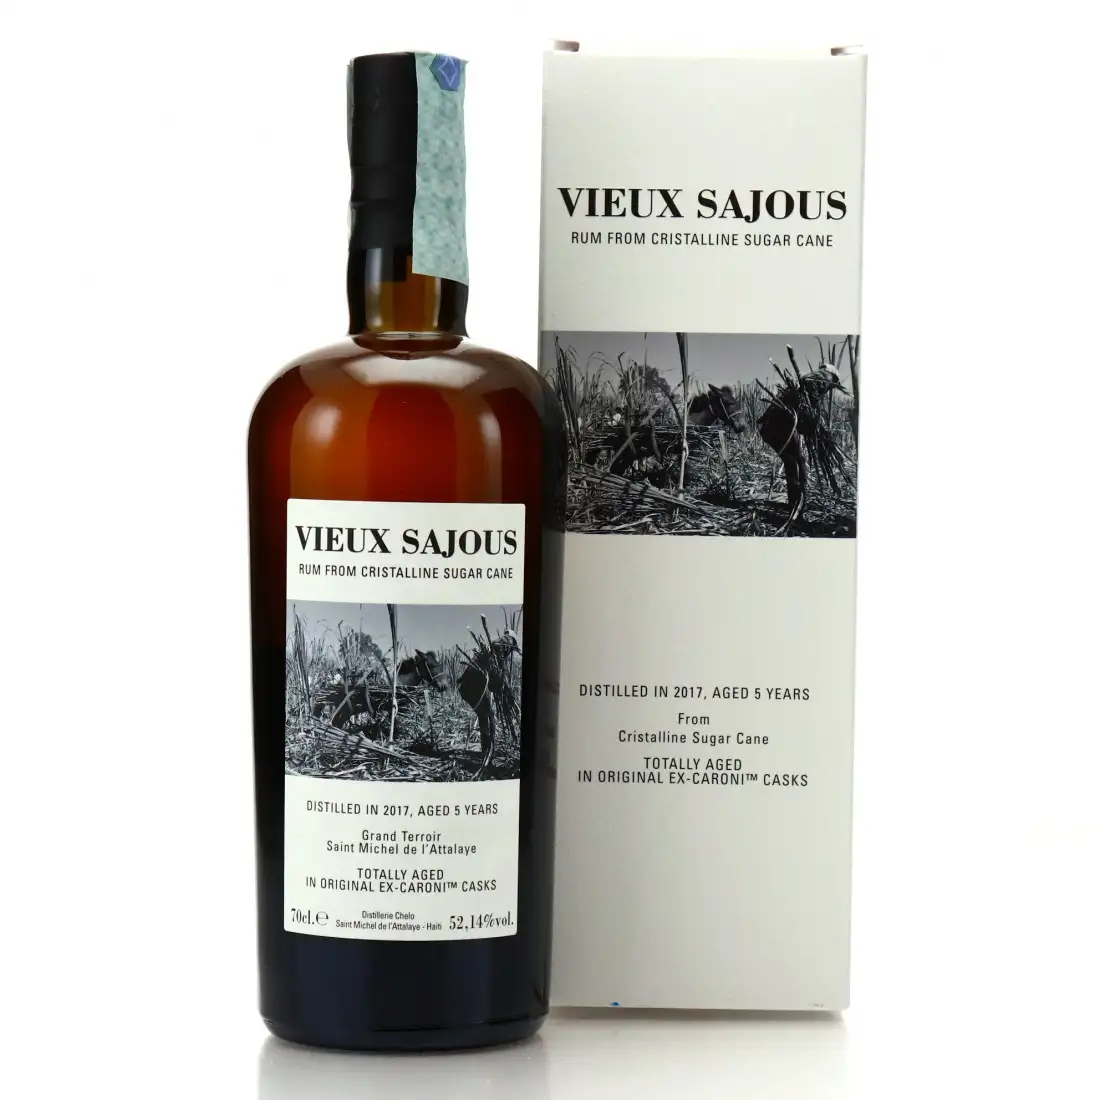 Image of the front of the bottle of the rum Vieux Sajous (Ex-Caroni Casks)